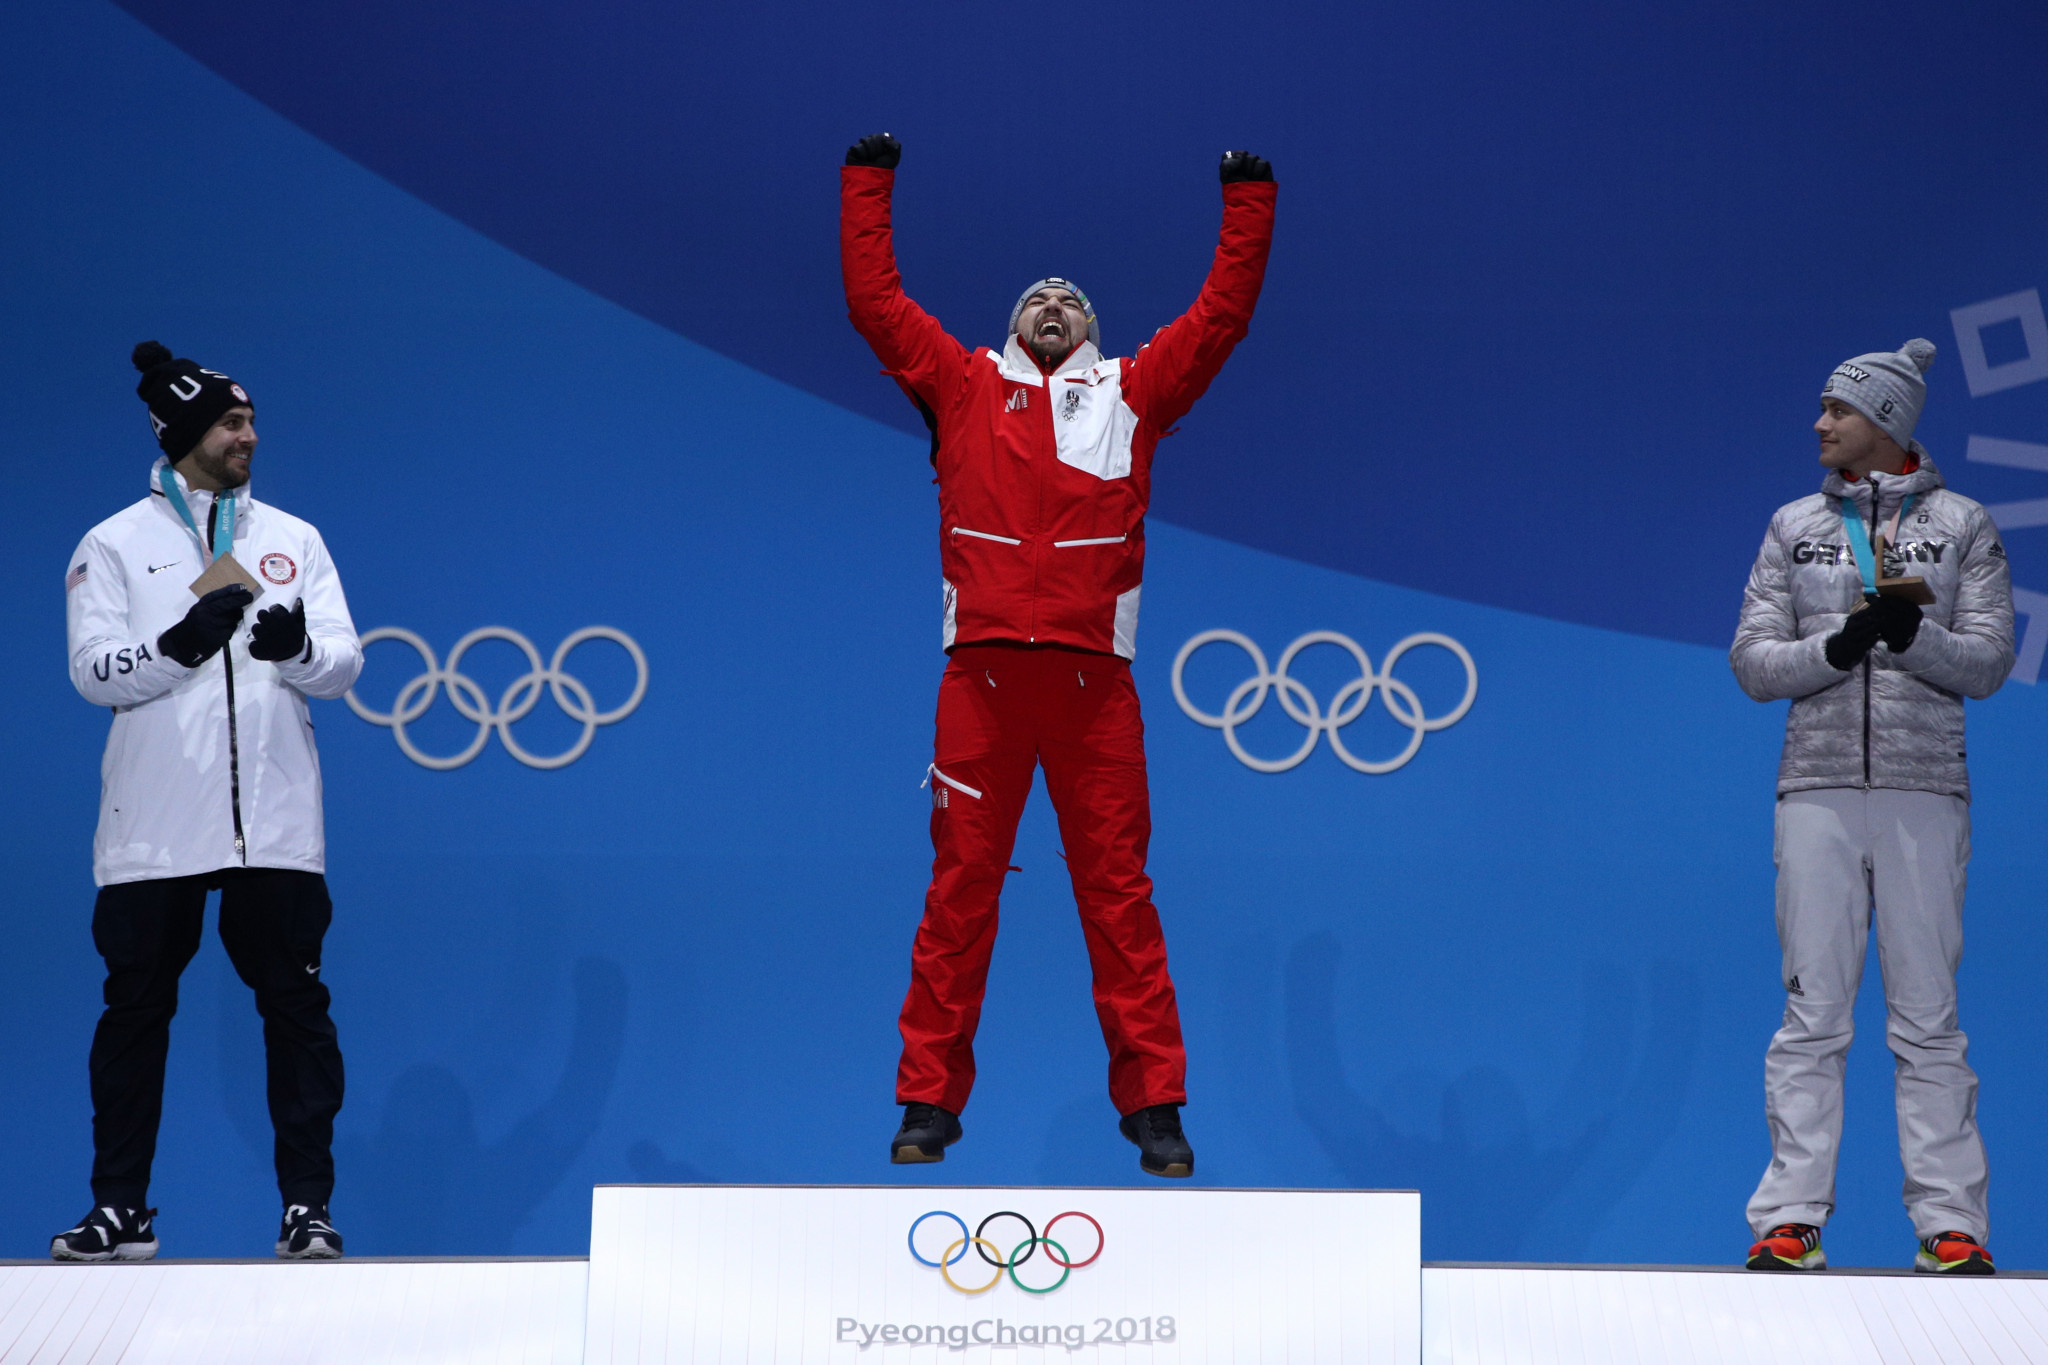 David Gleirscher celebrates winning the men's luge event at the 2018 Pyeongchang Winter Olympics ©Getty Images